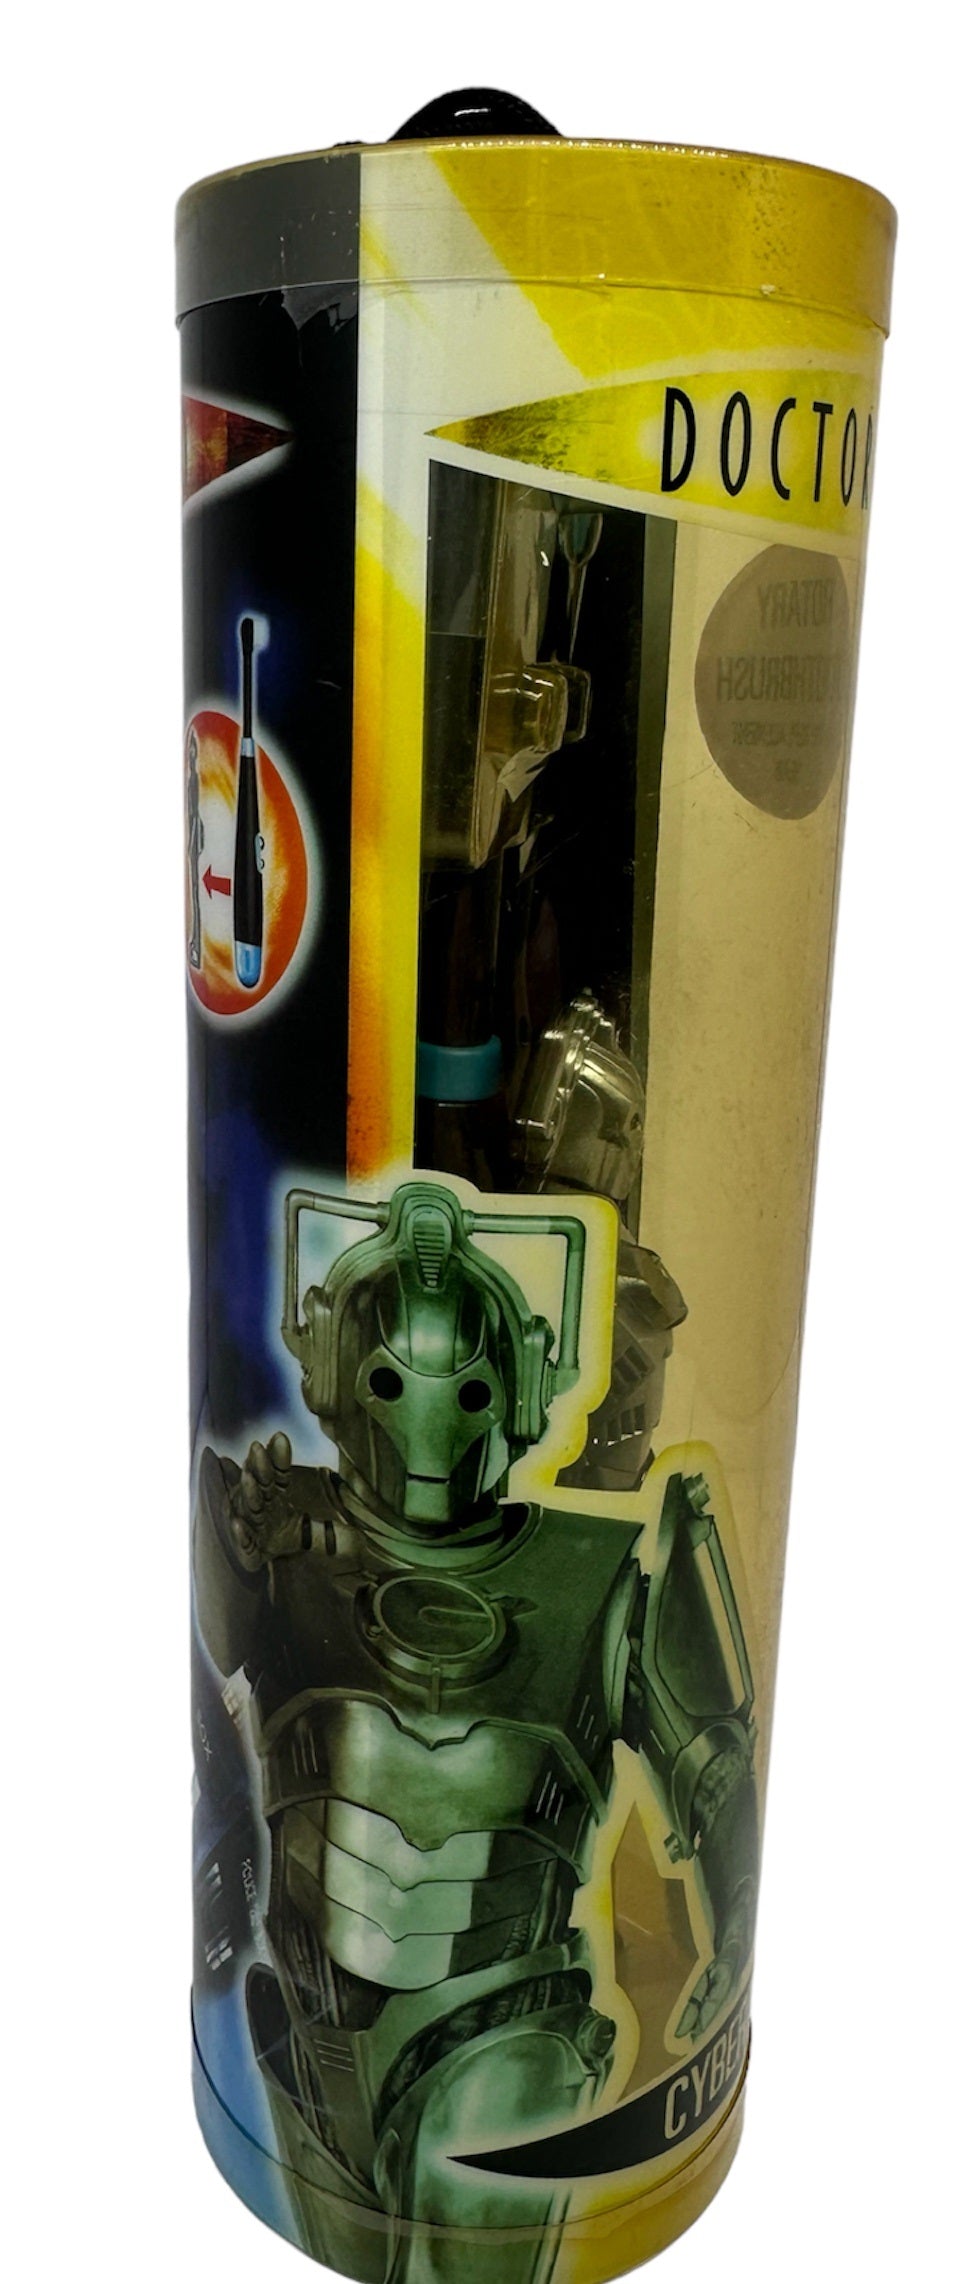 Vintage 2005 Doctor Dr Who Cyberman Rotary Toothbrush With Replacement Head - Brand New Factory Sealed Shop Stock Room Find